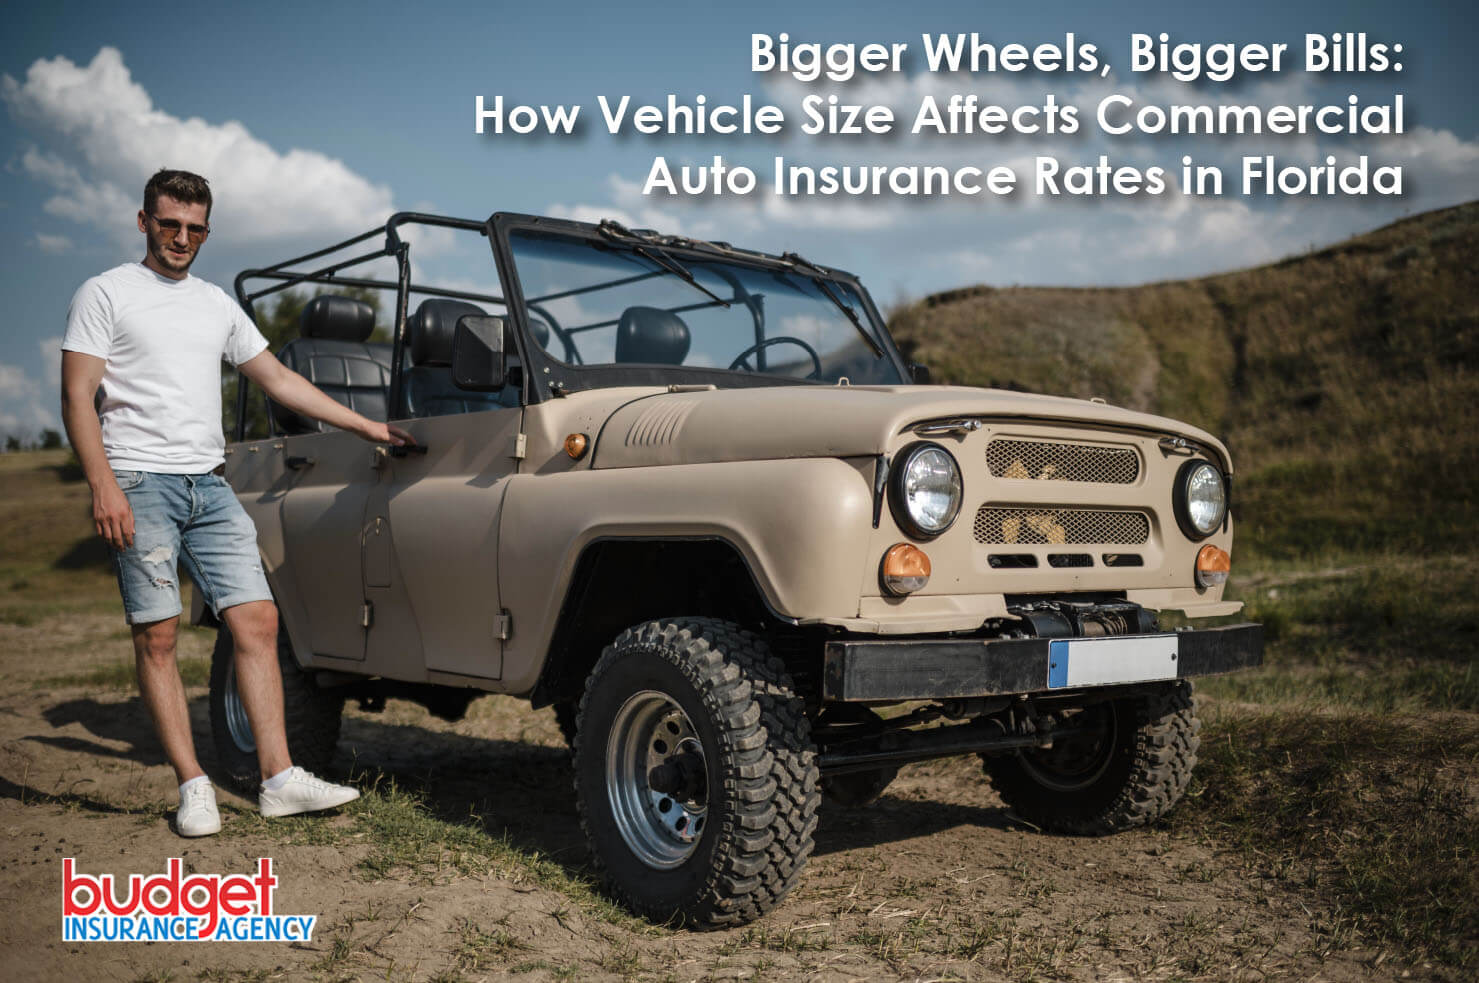 Bigger Wheels, Bigger Bills: How Vehicle Size Affects Commercial Auto Insurance Rates in Florida